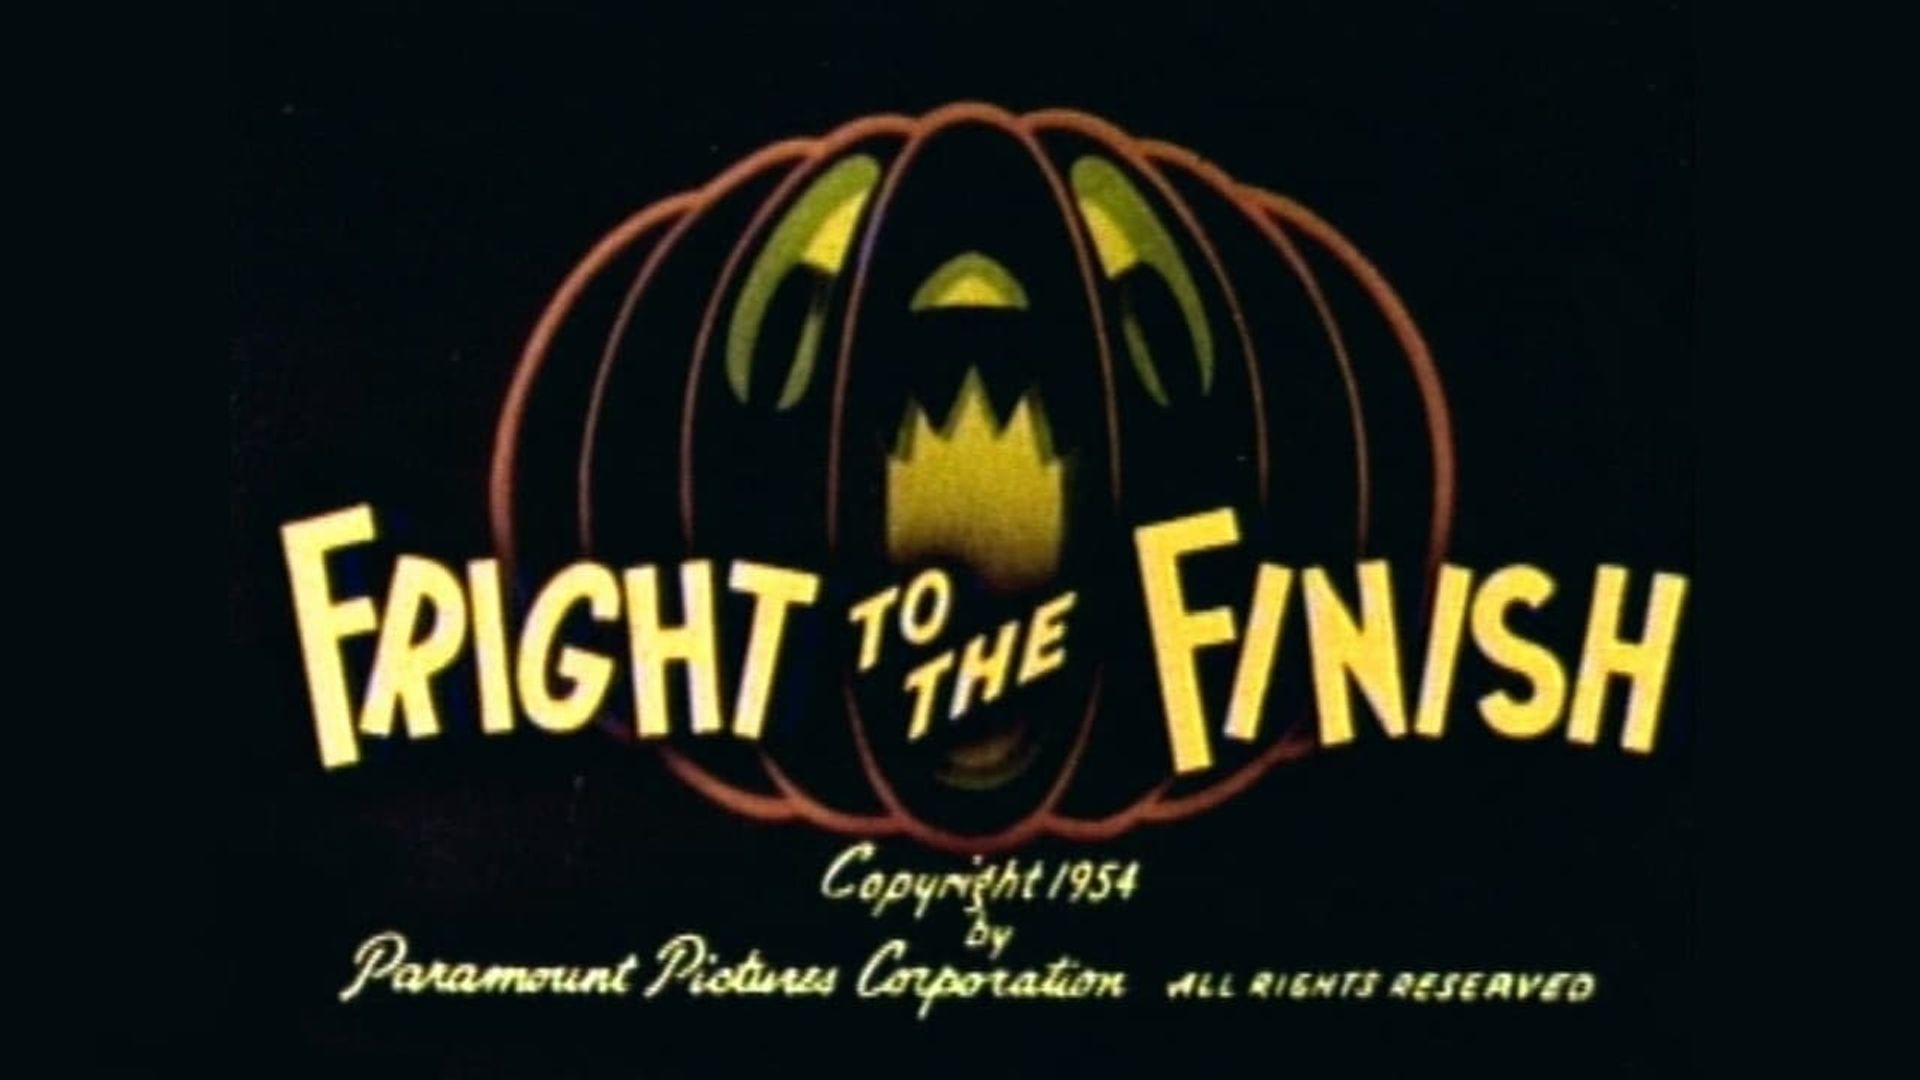 Fright to the Finish background